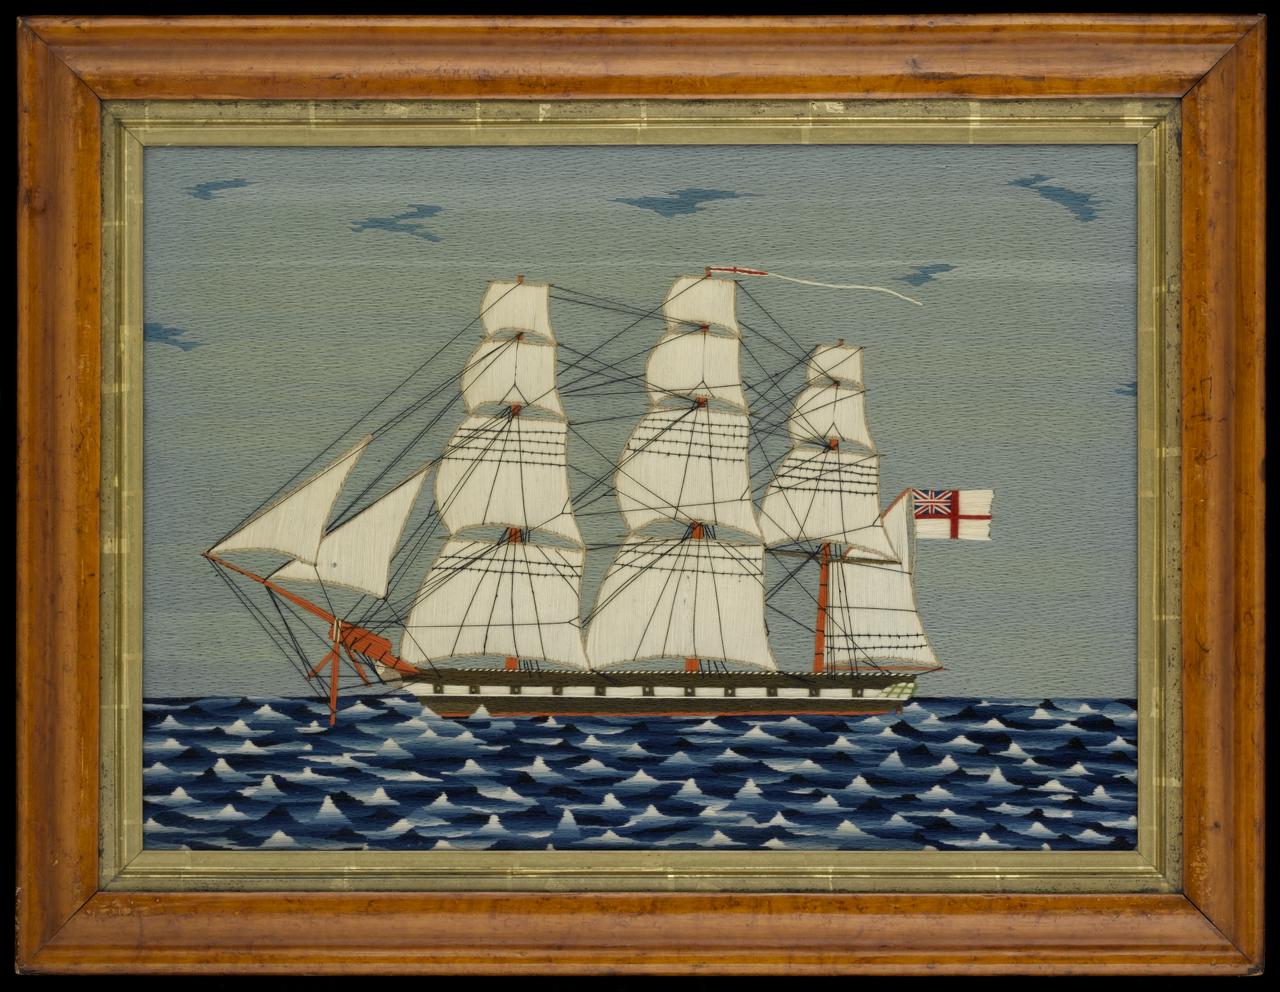 HMS 'Challenger' embroidery by David Joseph Mead